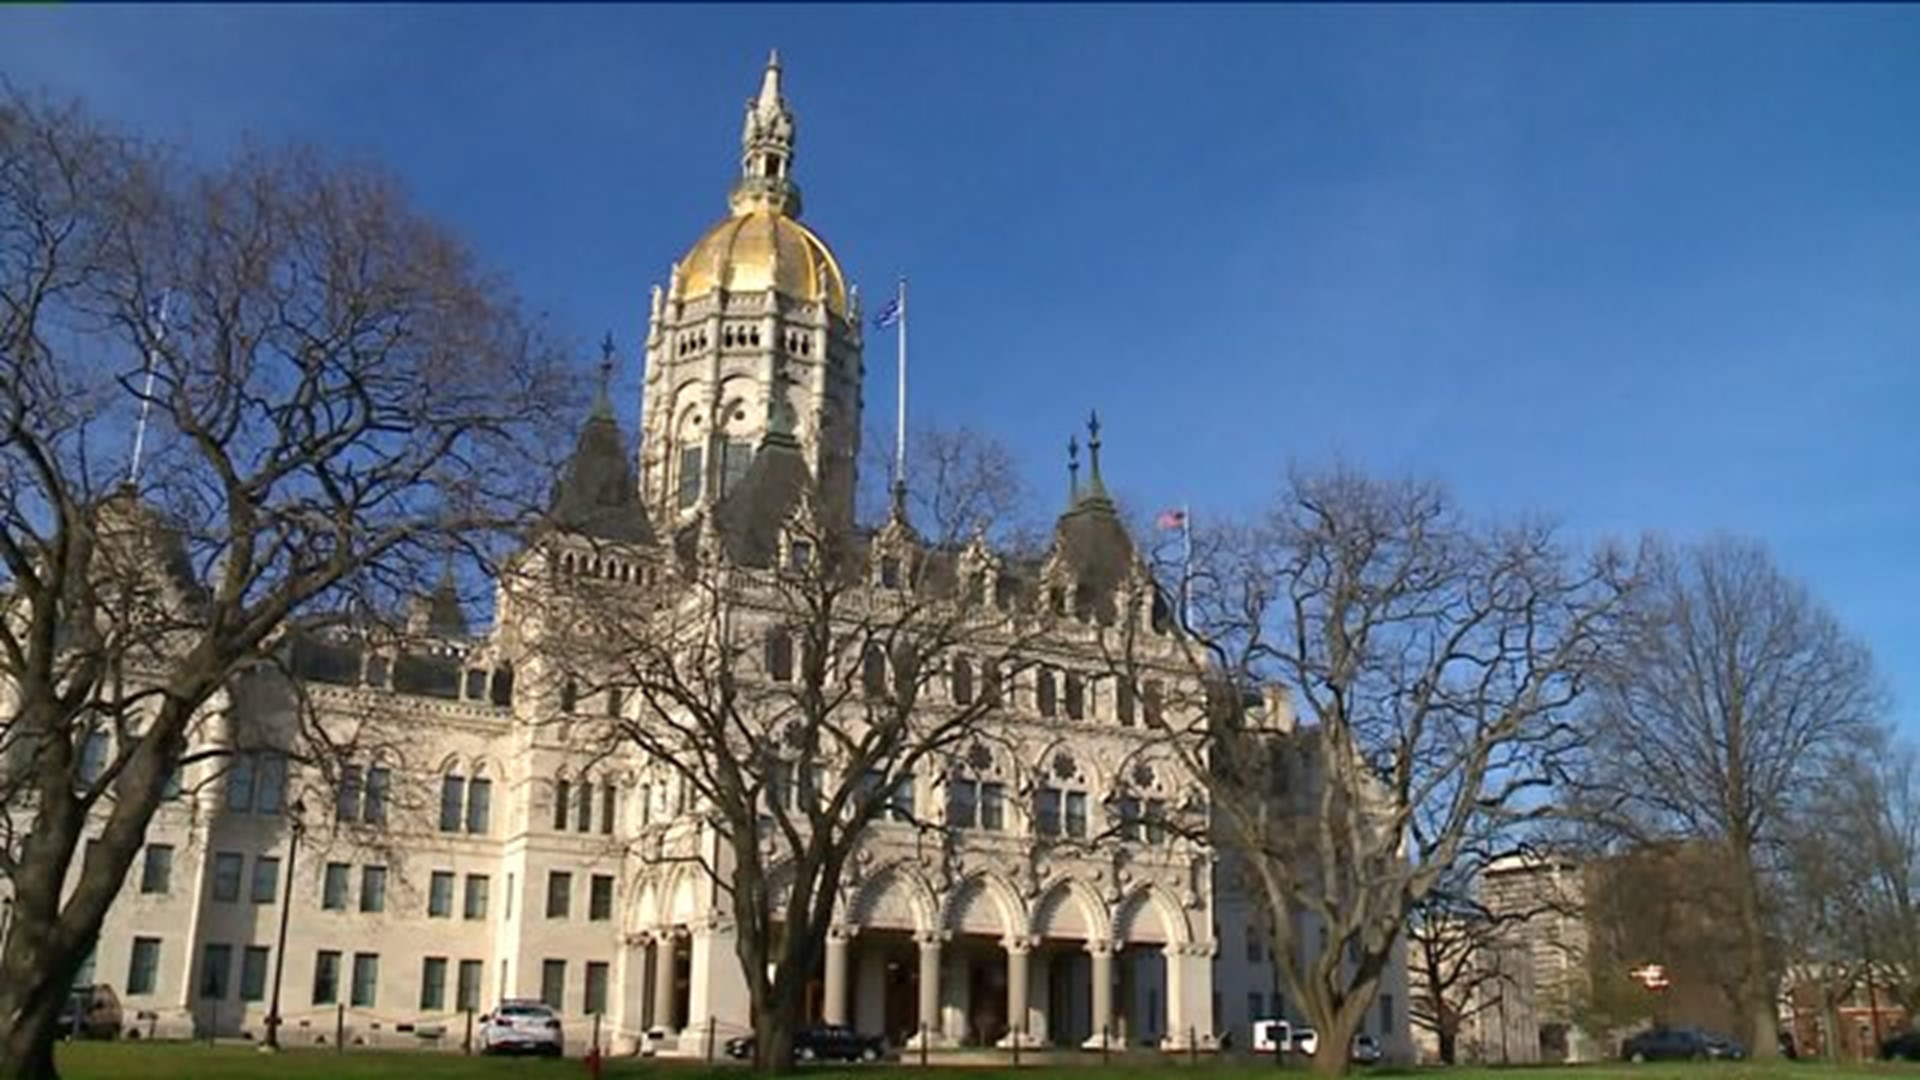 Reality of state employee layoffs causing strife in Connecticut